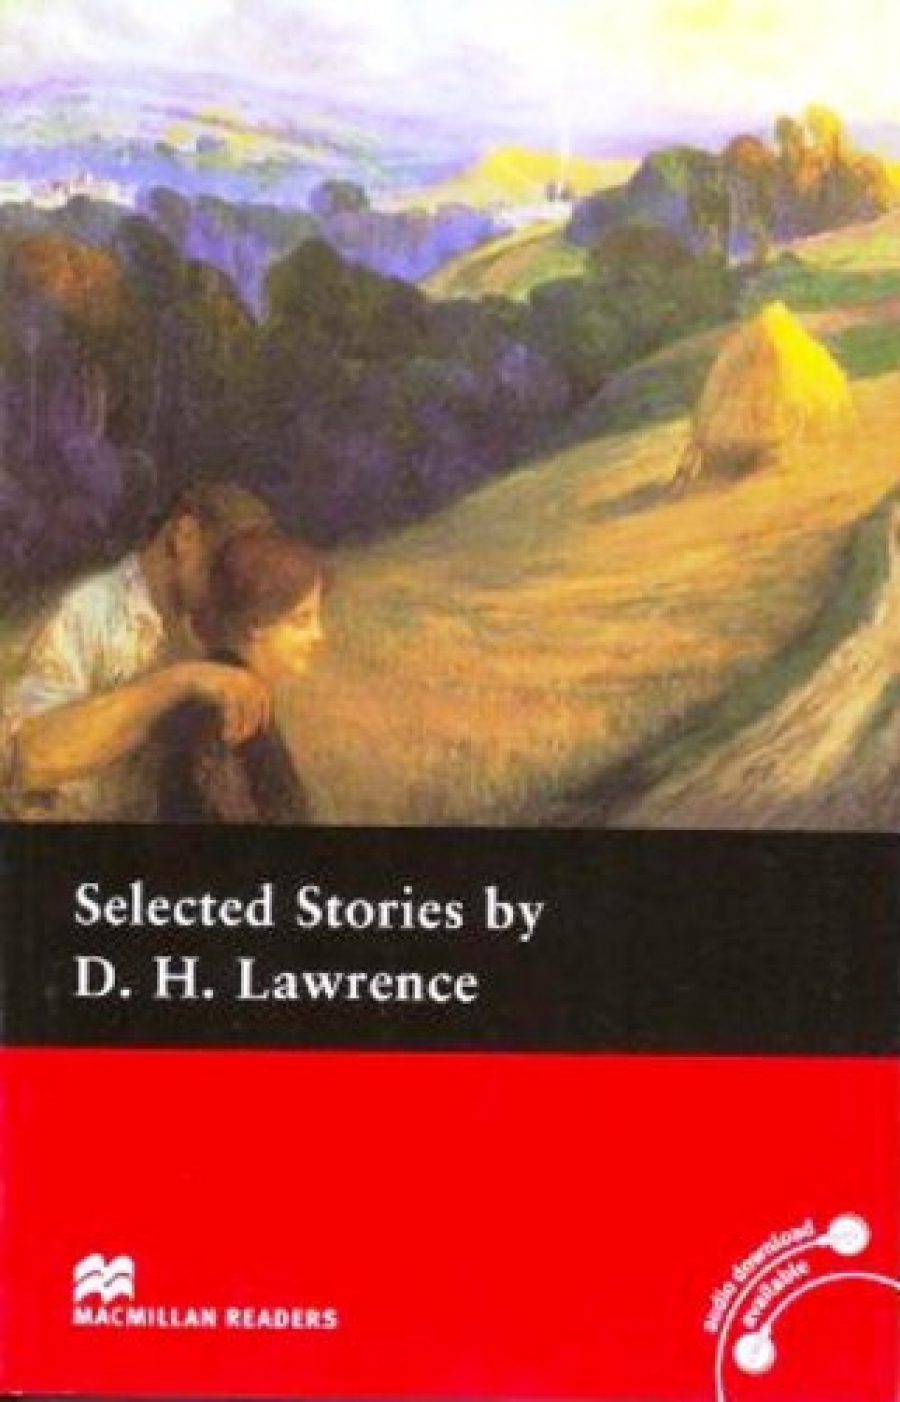 D.H. Lawrence, retold by Anne Collins Selected Stories by D. H. Lawrence 